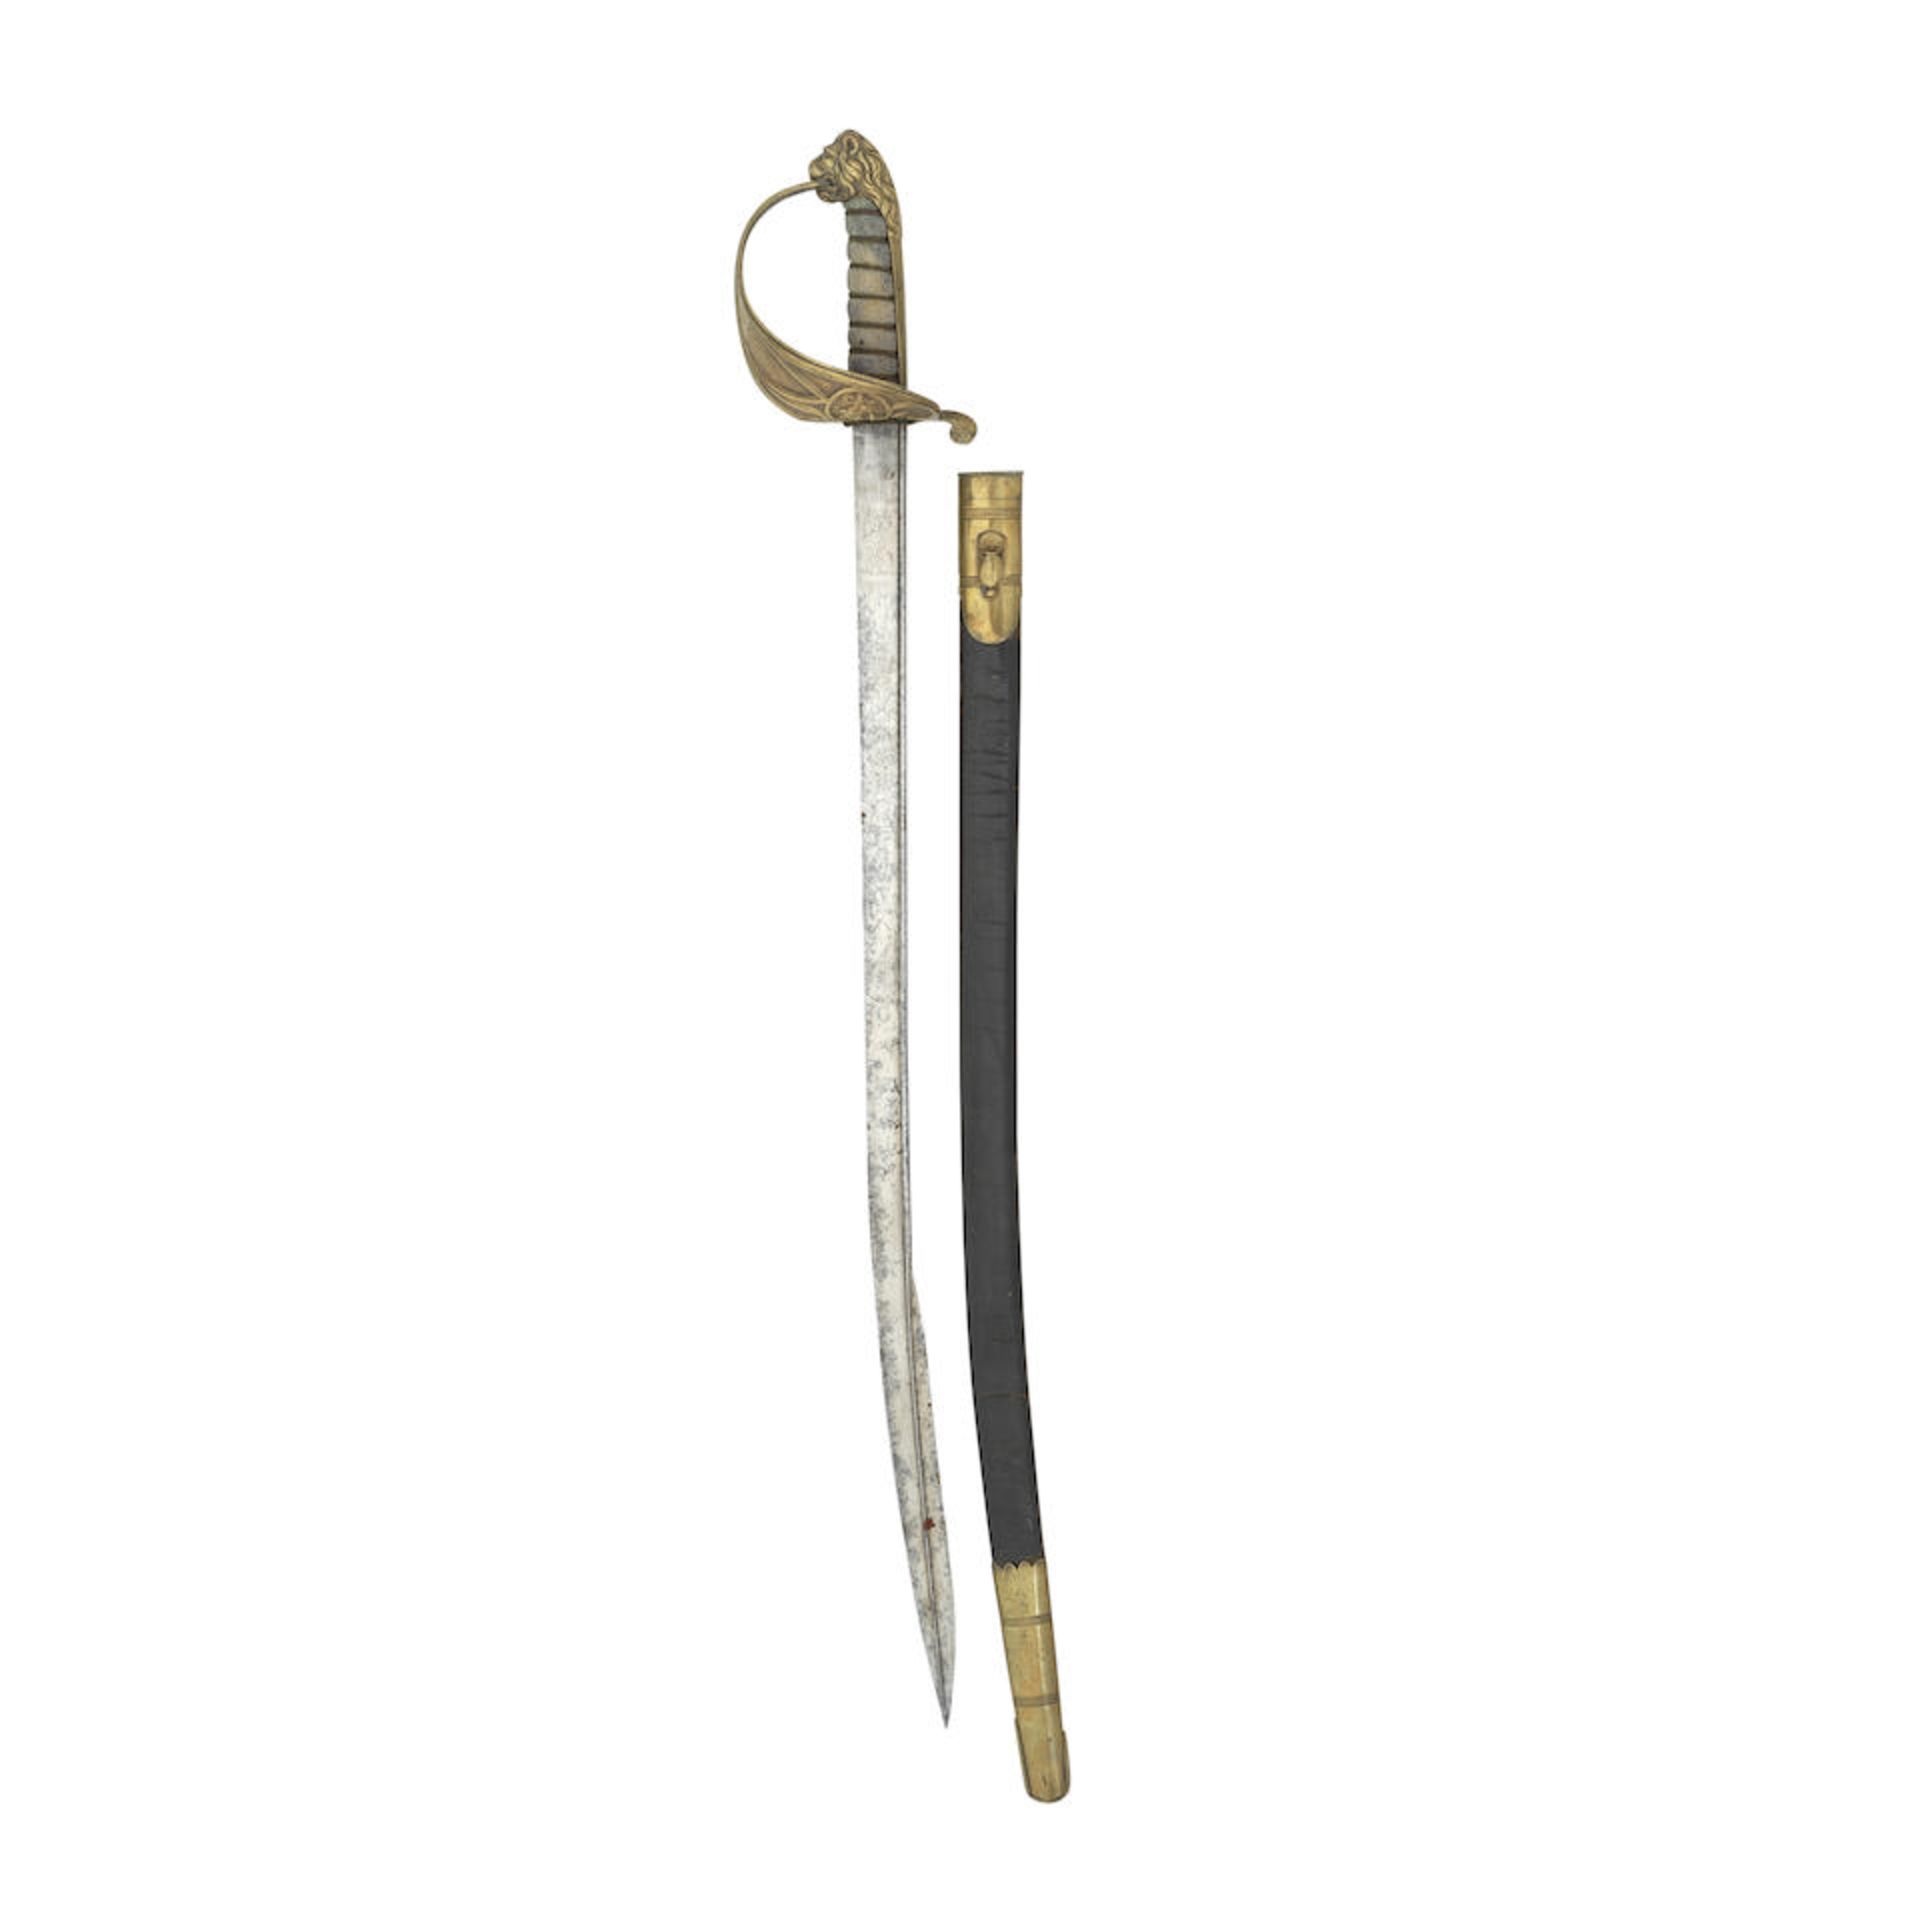 An East India Company Naval Officer's Sword